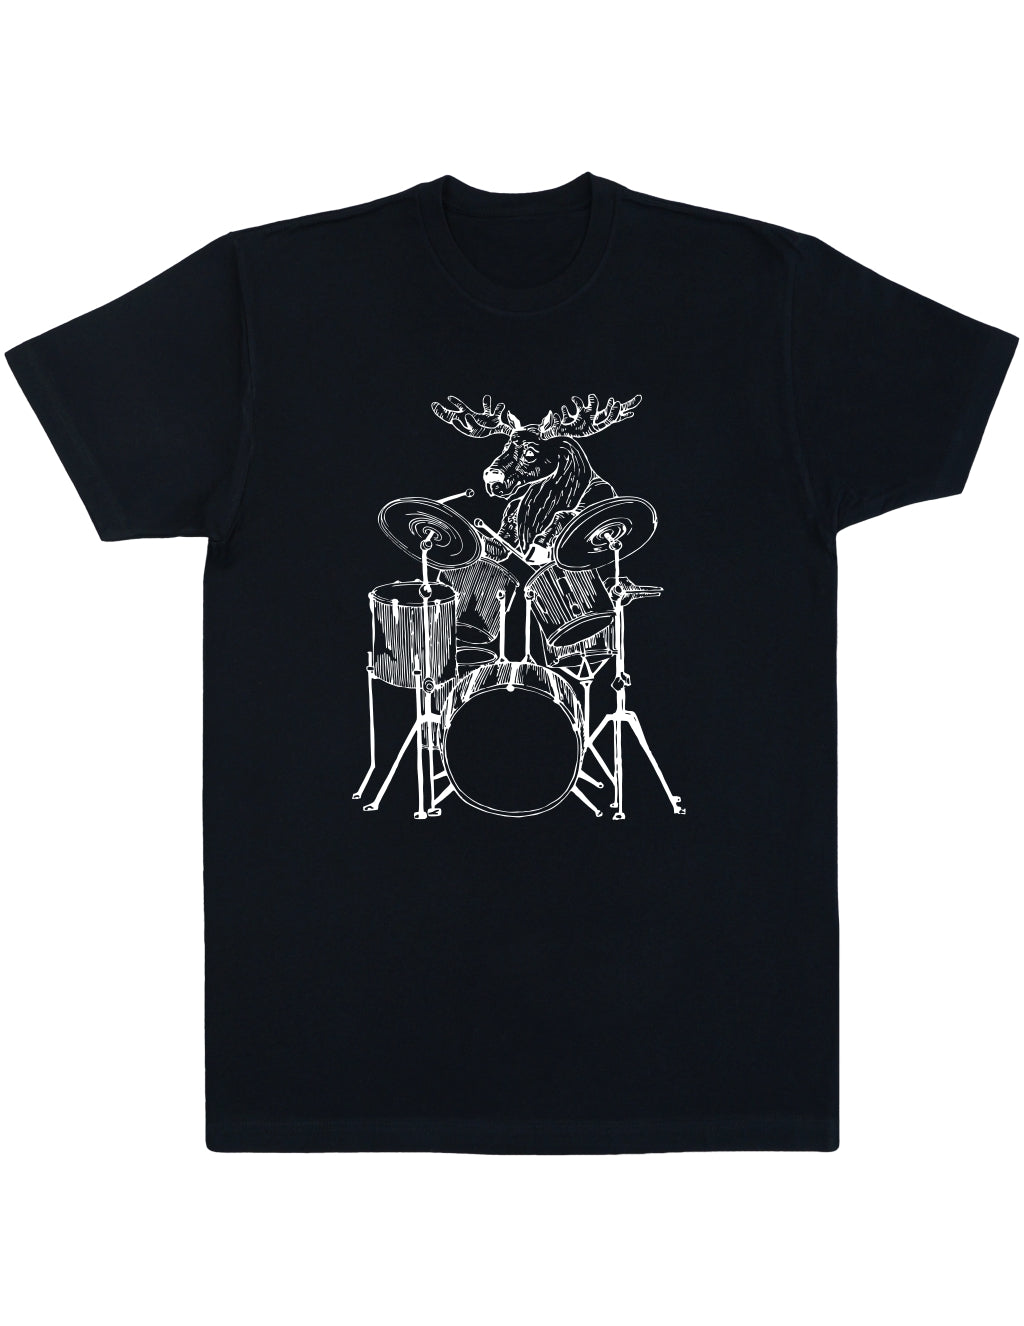 SEEMBO Moose Playing Drums Funny Drummer Musician Band Men Cotton T-Shirt